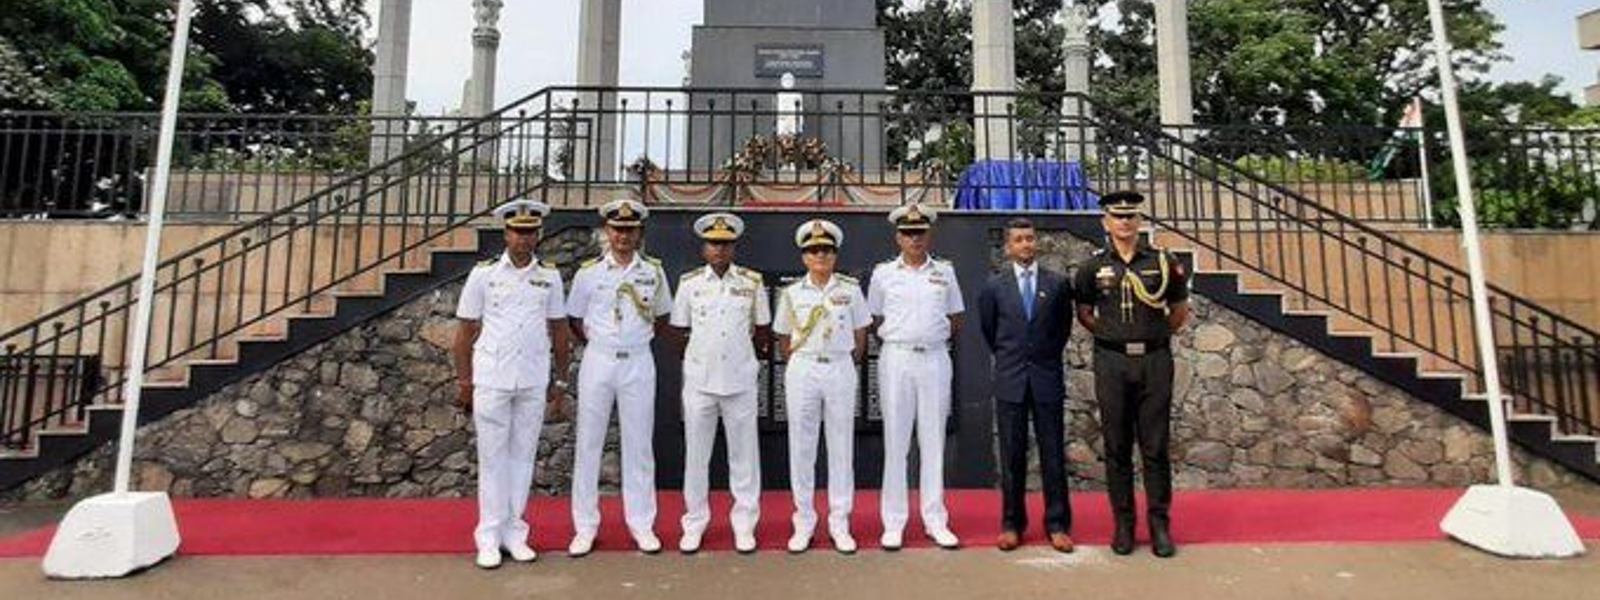 Vice Admiral of Indian Navy pays homage at memorial of Indian soldiers in Sri Lanka